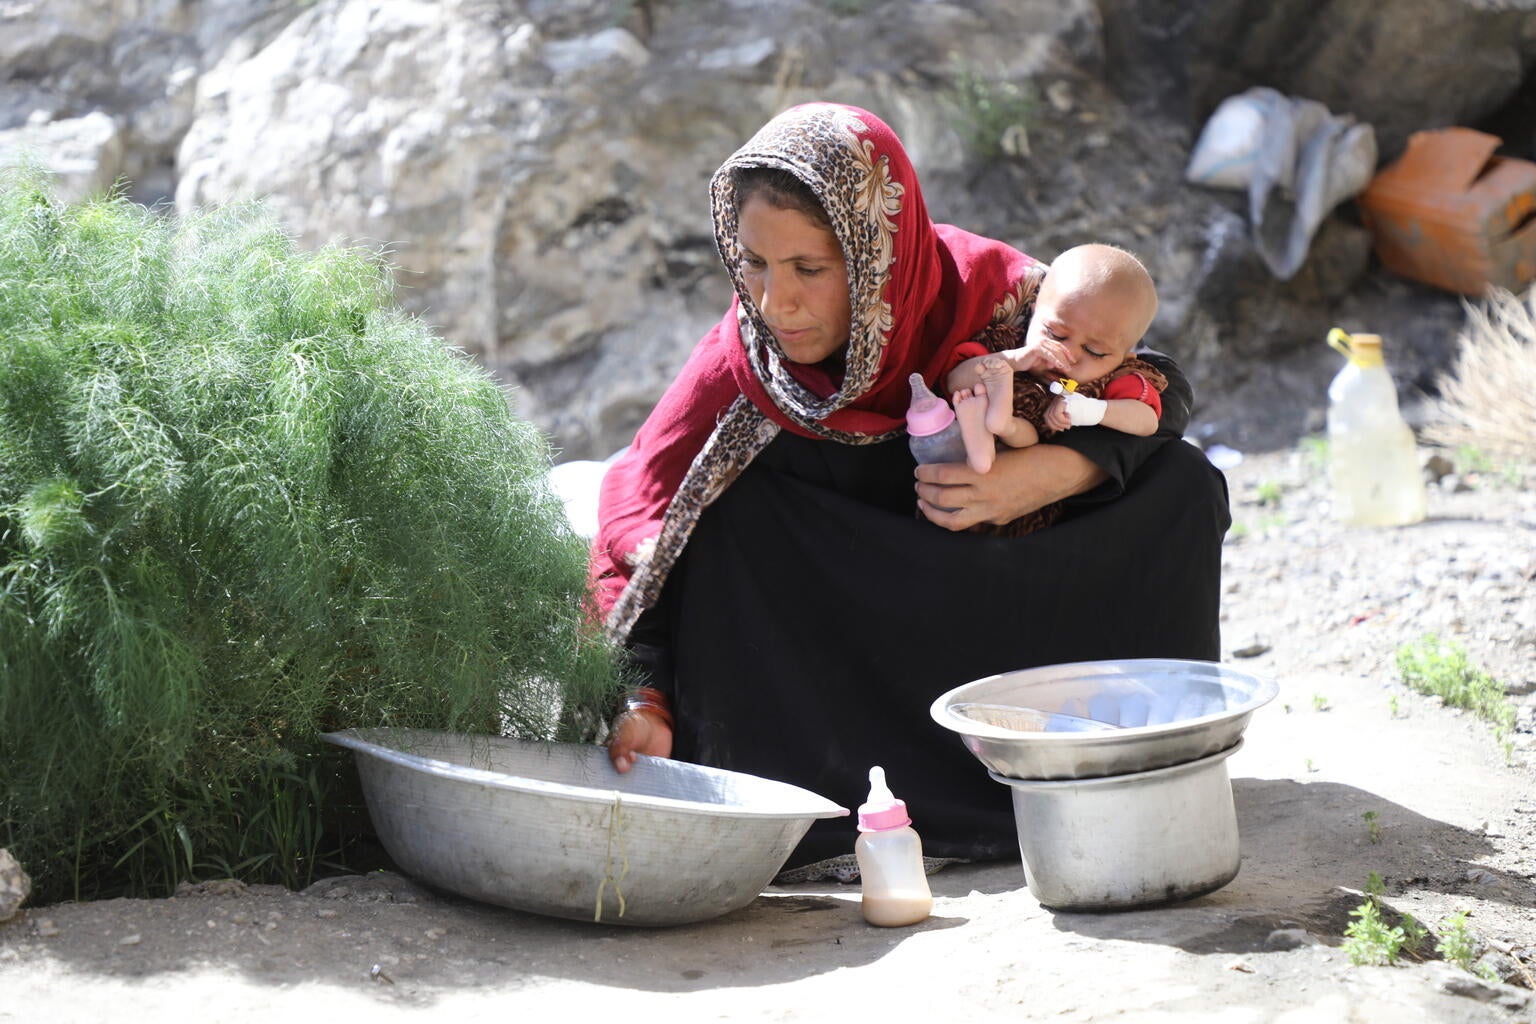 An Afghanistan mother holding her baby who is suffering from malnutrition